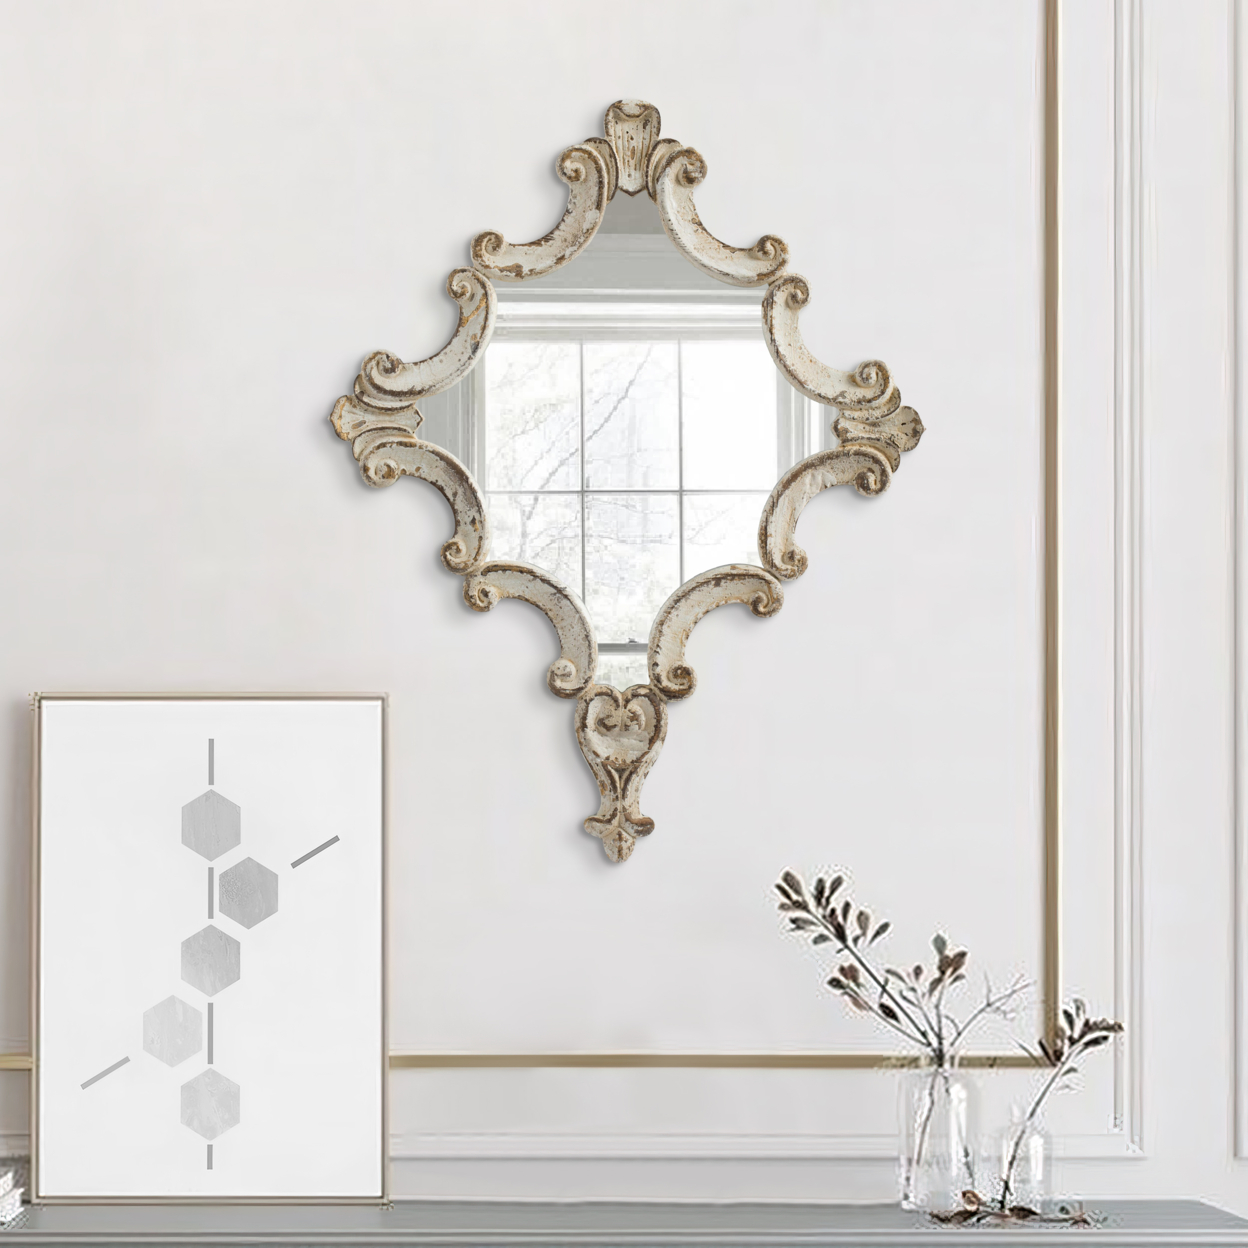 30 Inch Accent Wall Mirror, Carved Ornate Scrollwork Antique White Fir Wood- Saltoro Sherpi